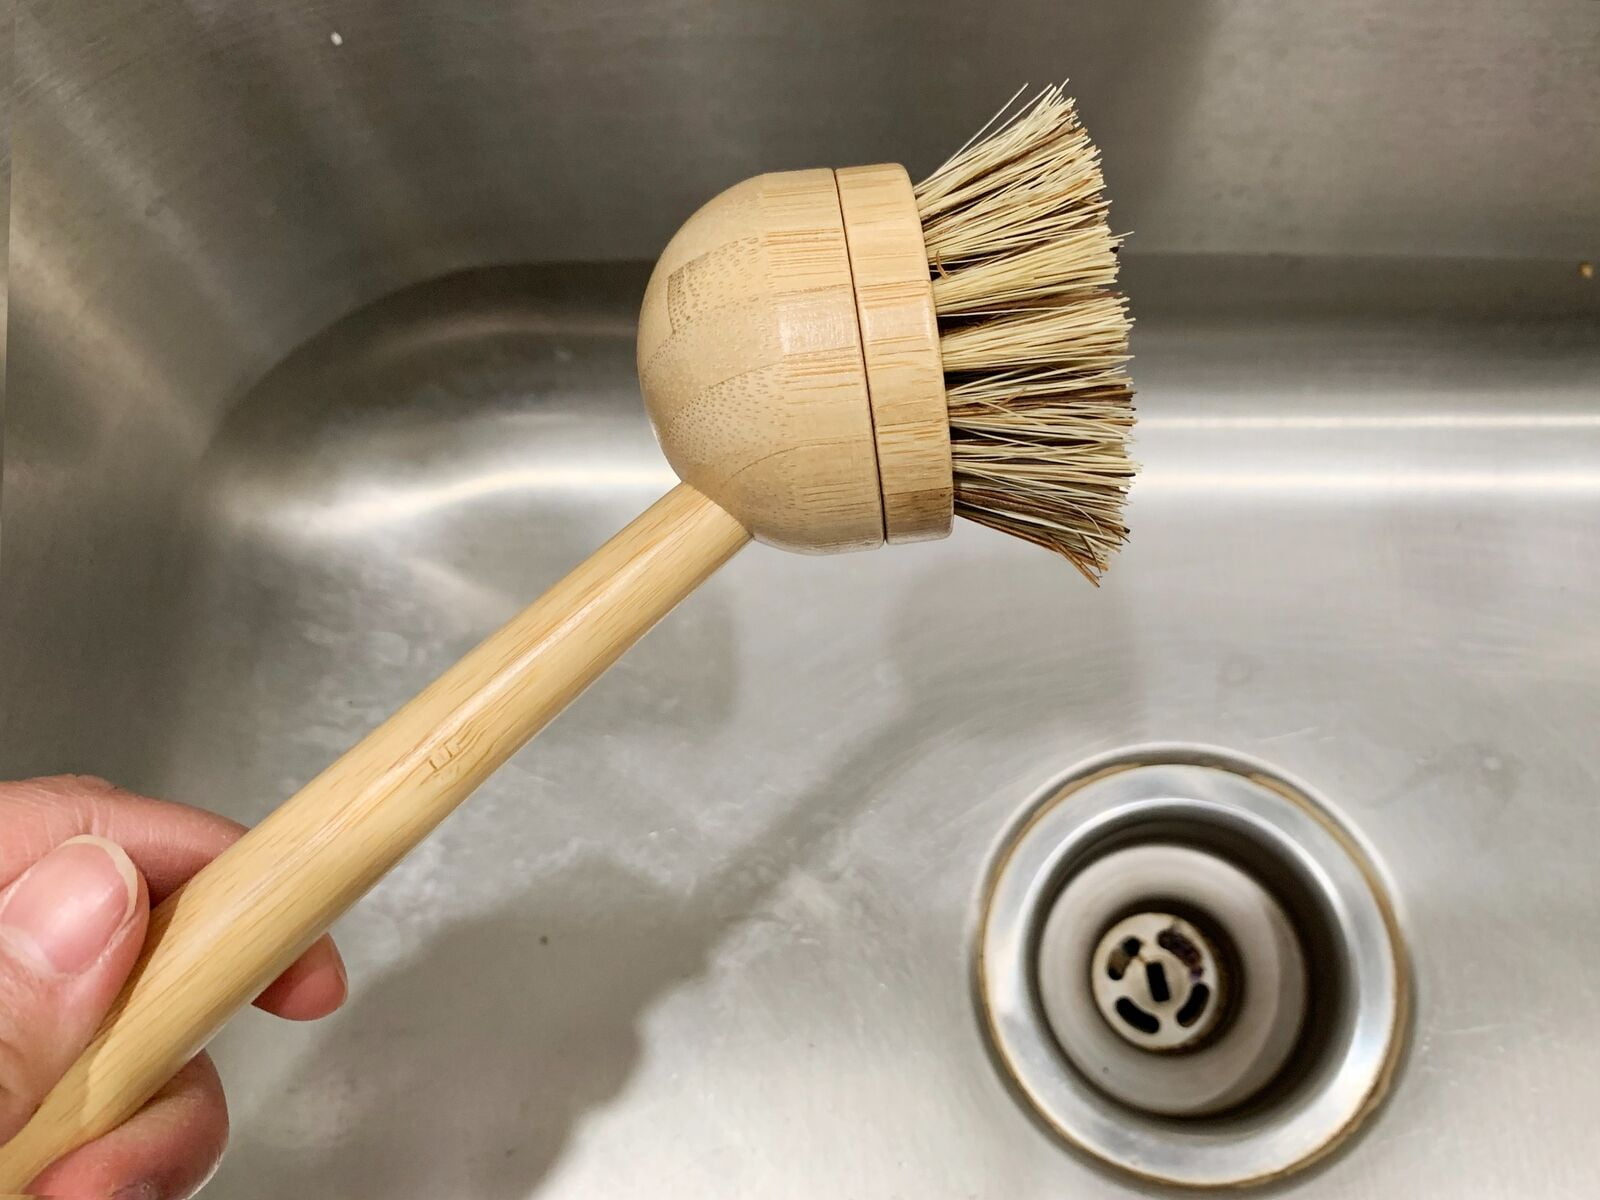 Short Sisal Dish Brush for Kitchen Bathroom Cleaning Produce Washing D –  JUNELILYBEAUTY